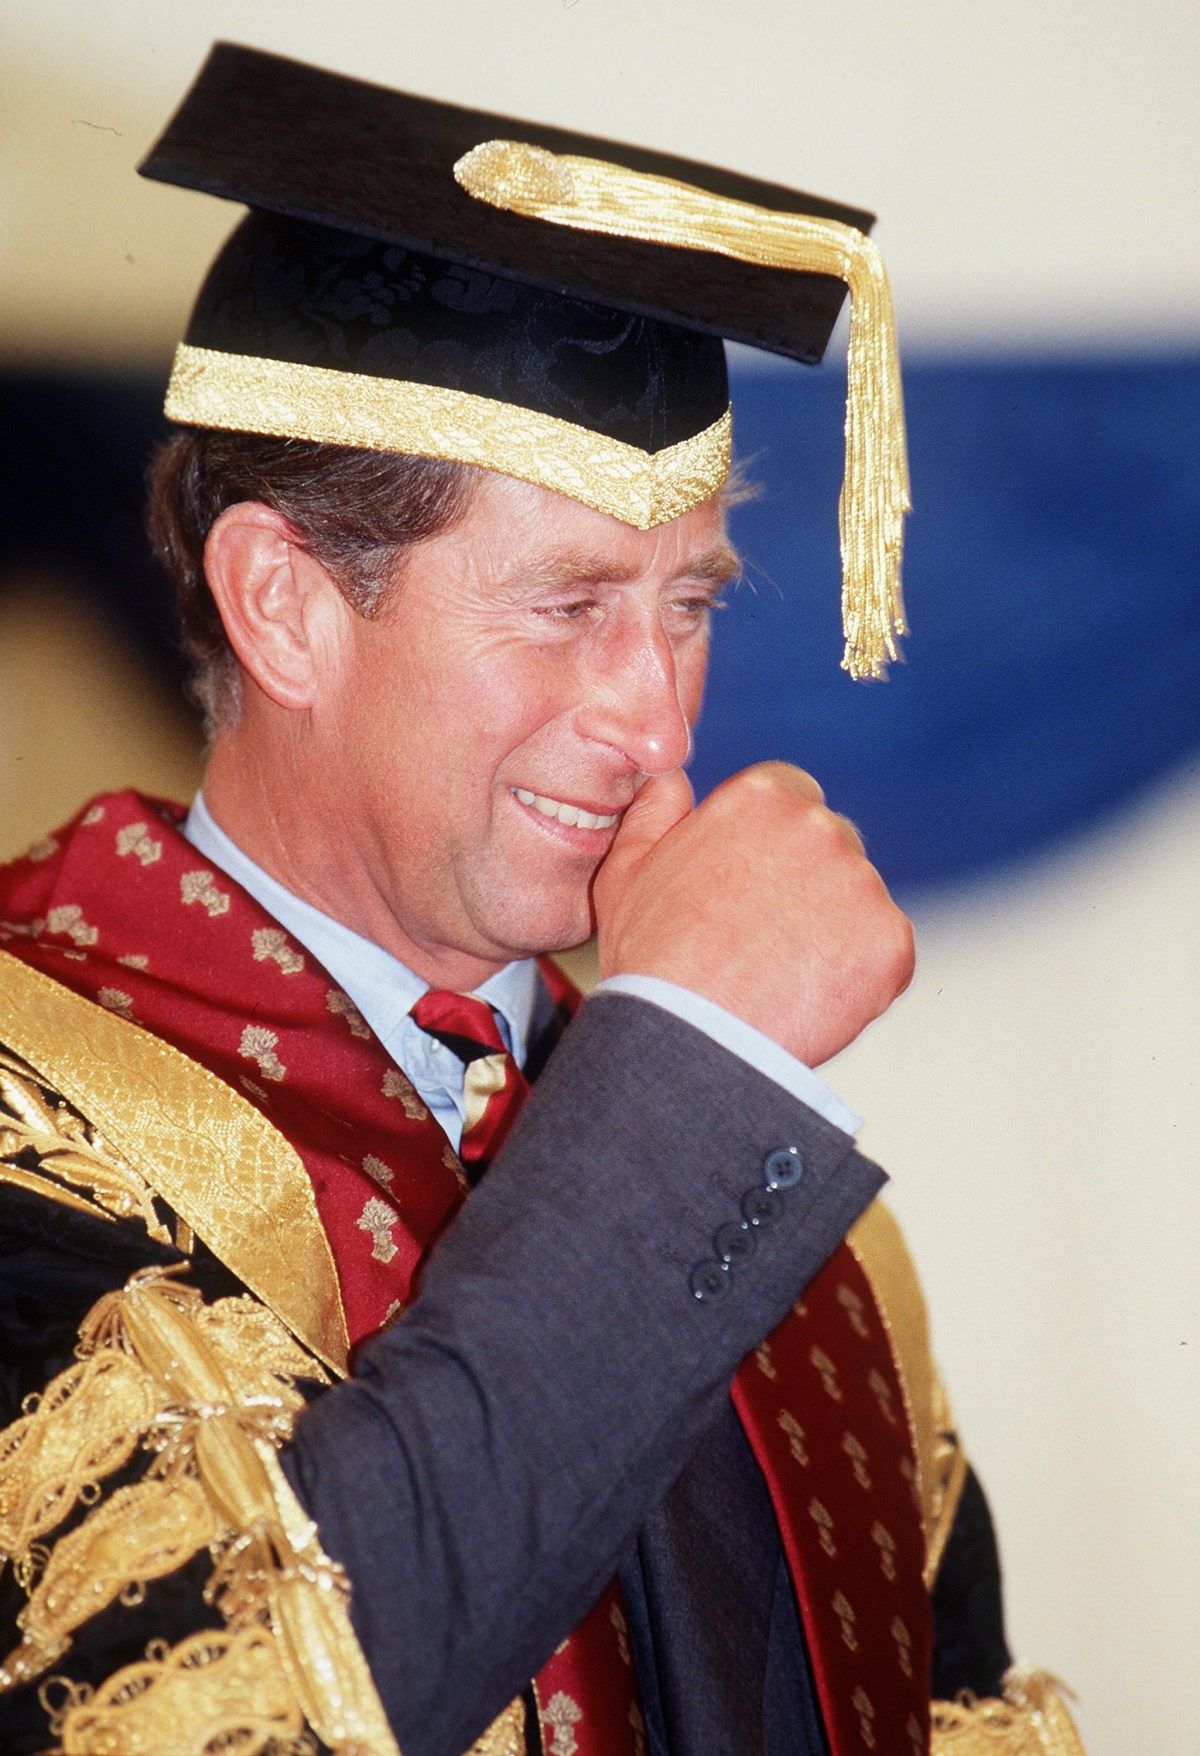 Then-Prince Charles scracthing his nose during a graduation ceremony at The Royal Agricultural College